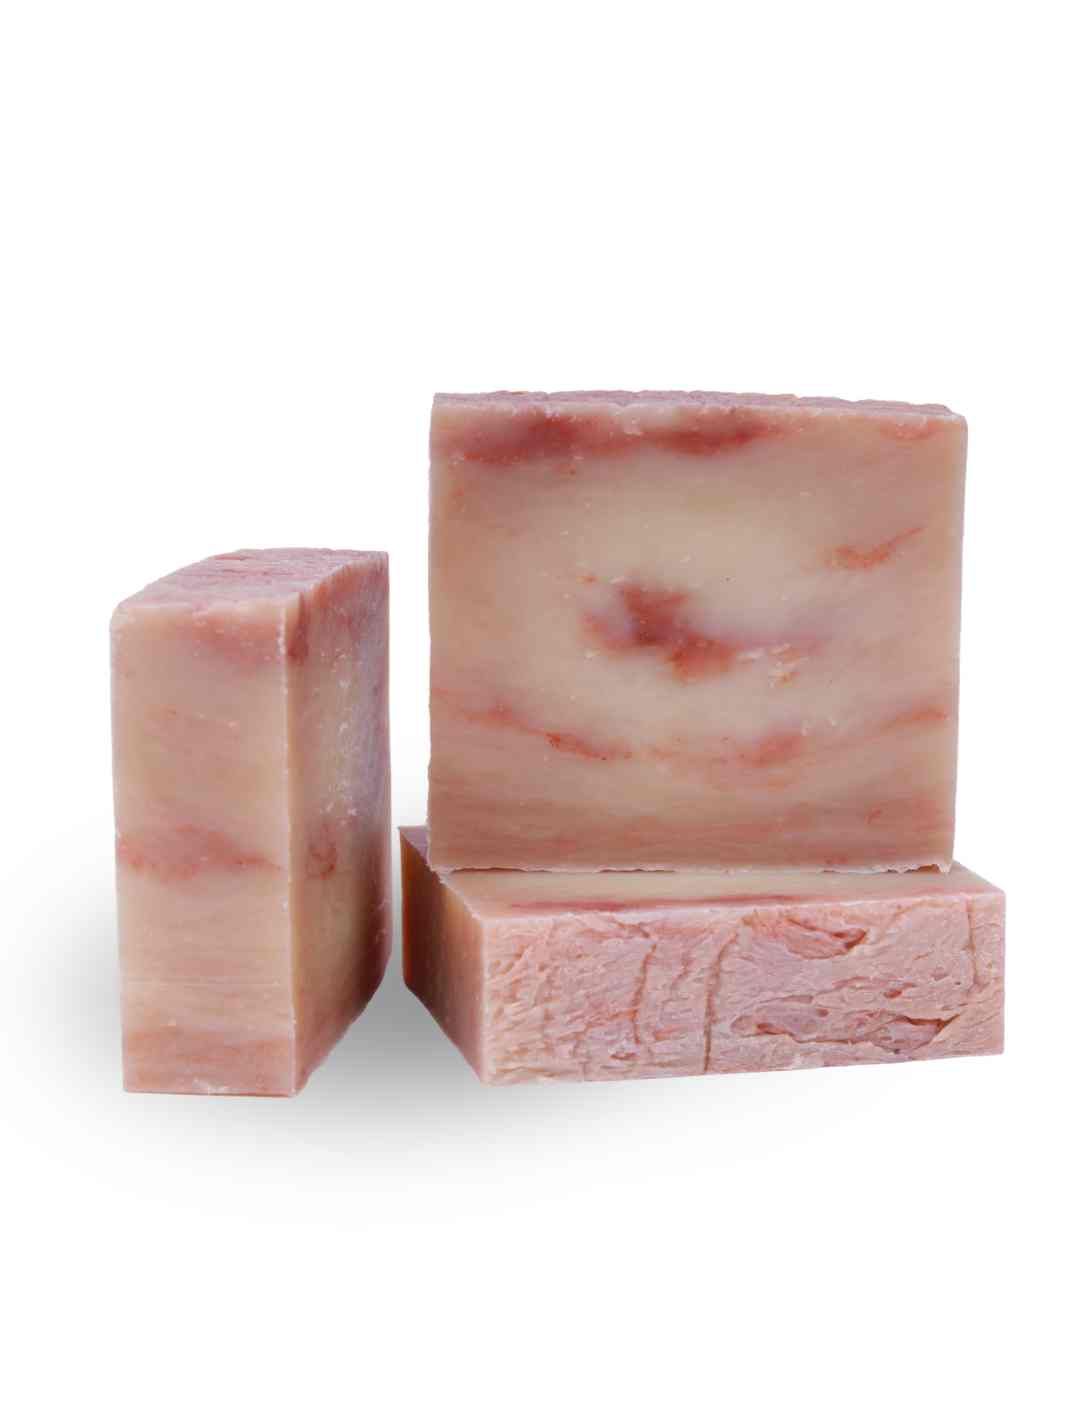 Good Soul Shop Moisturizing Natural Soap Cherry Jubilee Scent Cherry Almond and Aloe